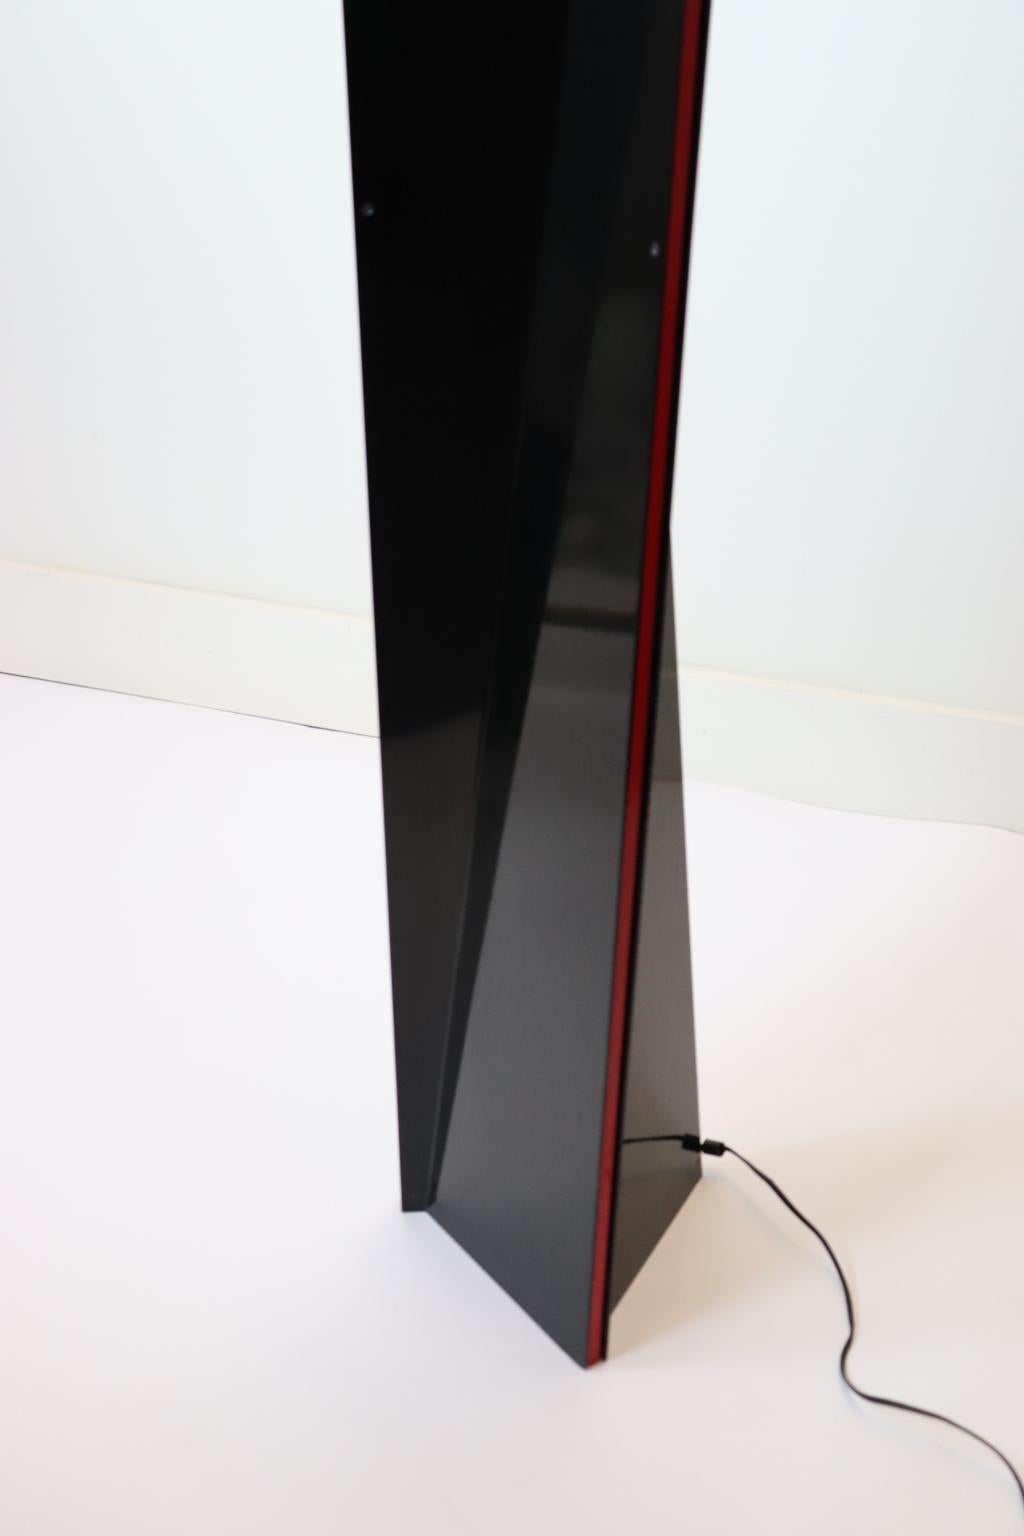 Mauro Marzollo Sculptured Floor Lamp Black with Red Stripes Details For Sale 4